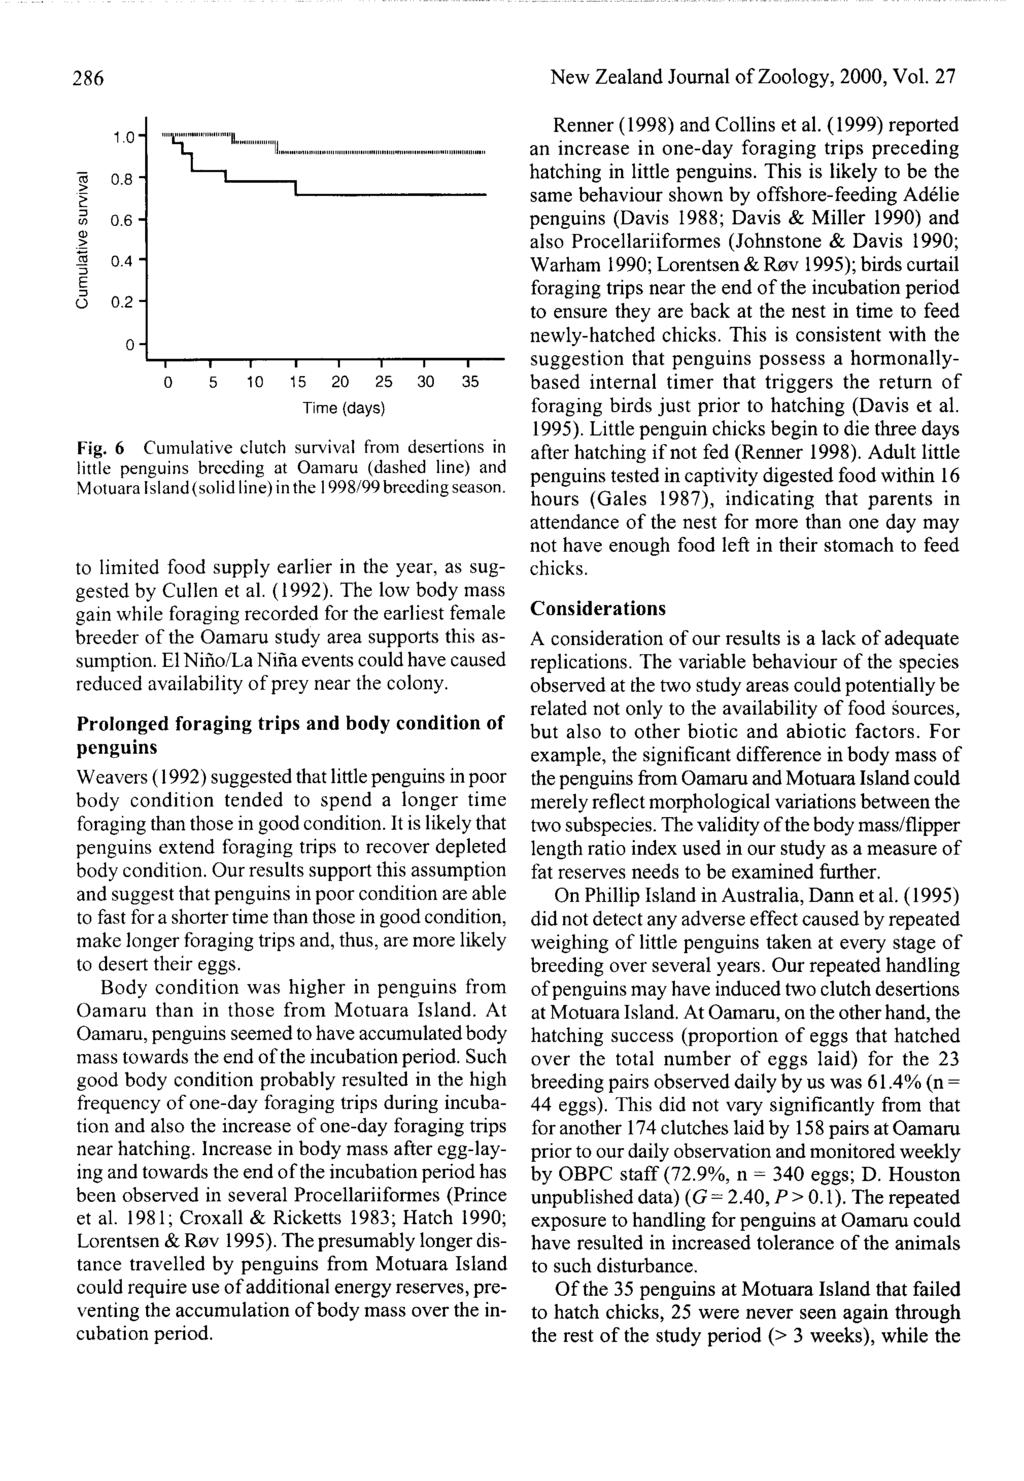 286 New Zealand Journal of Zoology, 2000, Vol. 27 0.8 " 1.0-0.6-.2 0.4 - I O 0.2-0- 10 15 20 25 Time (days) 30 35 Fig.